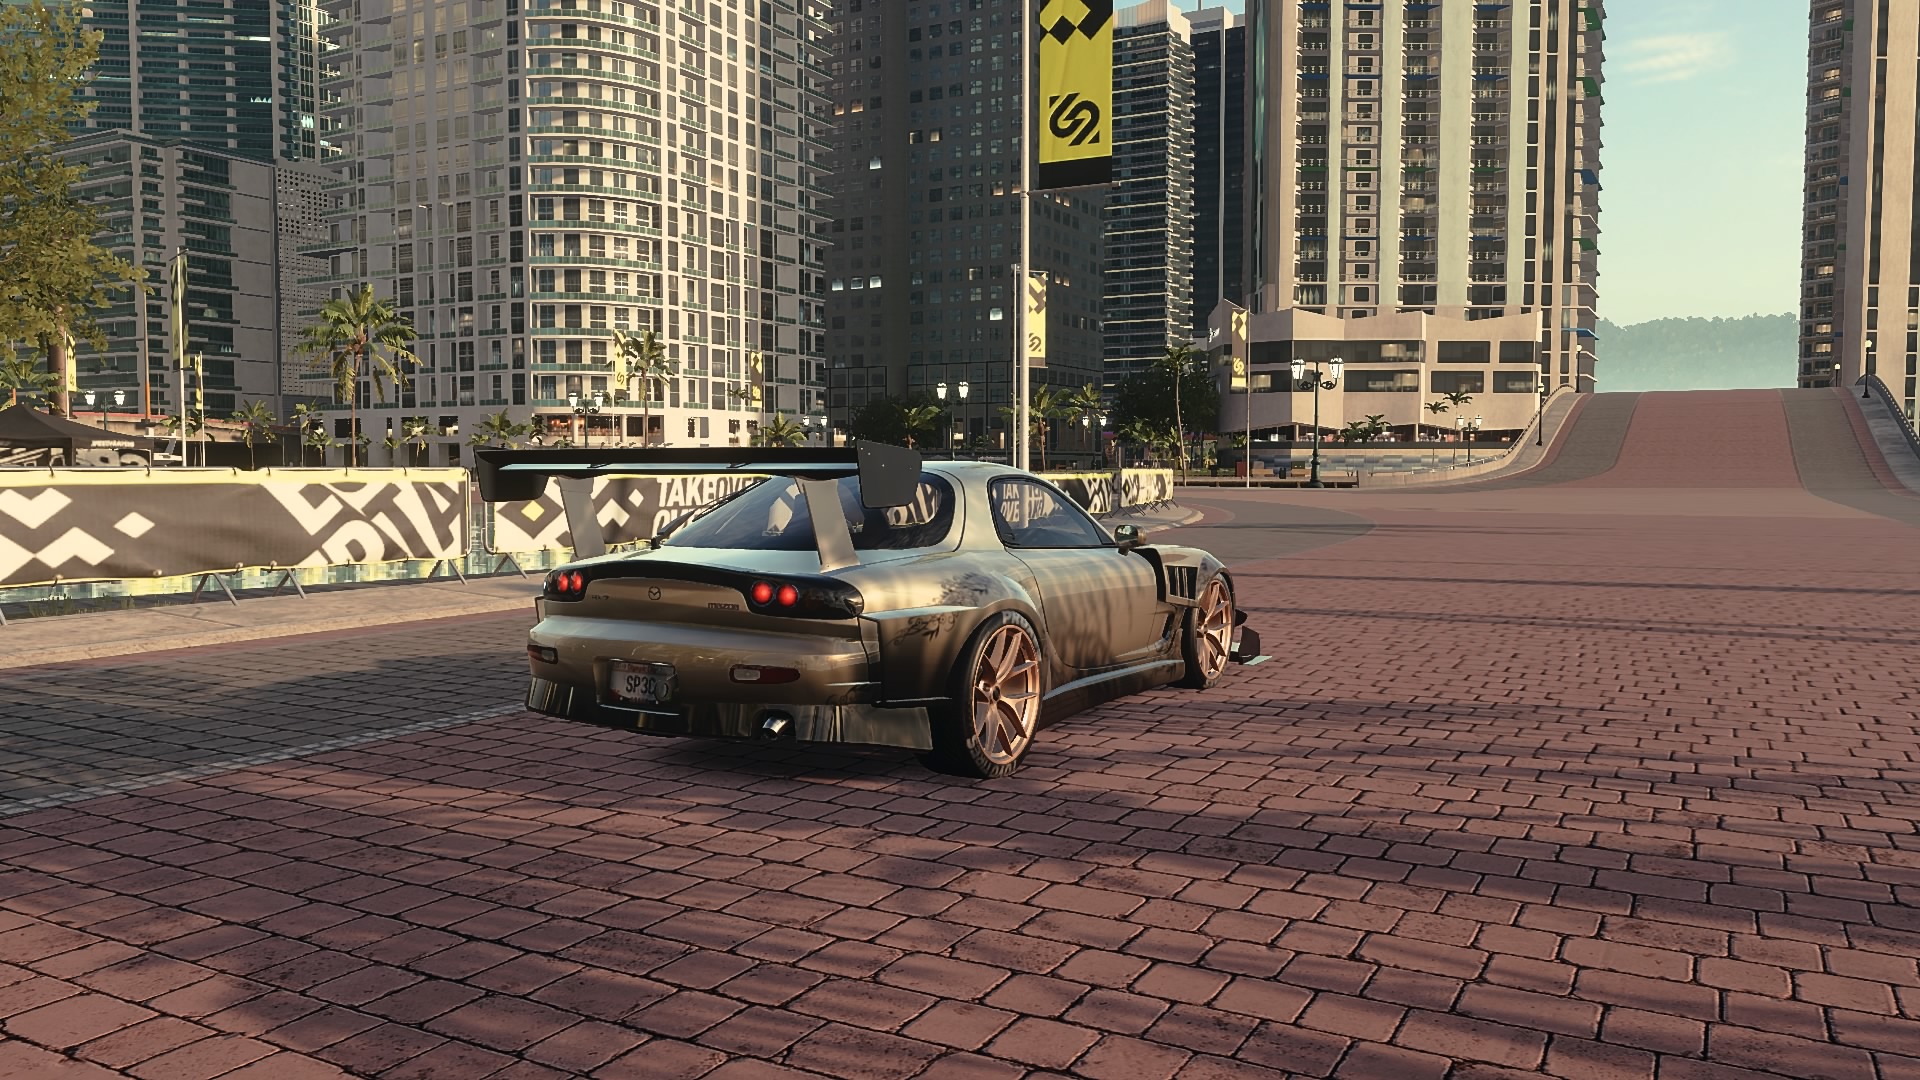 General 1920x1080 car Need for Speed: Heat video games PlayStation 4 gold video game art Mazda RX-7 taillights vehicle building rear view CGI signs palm trees